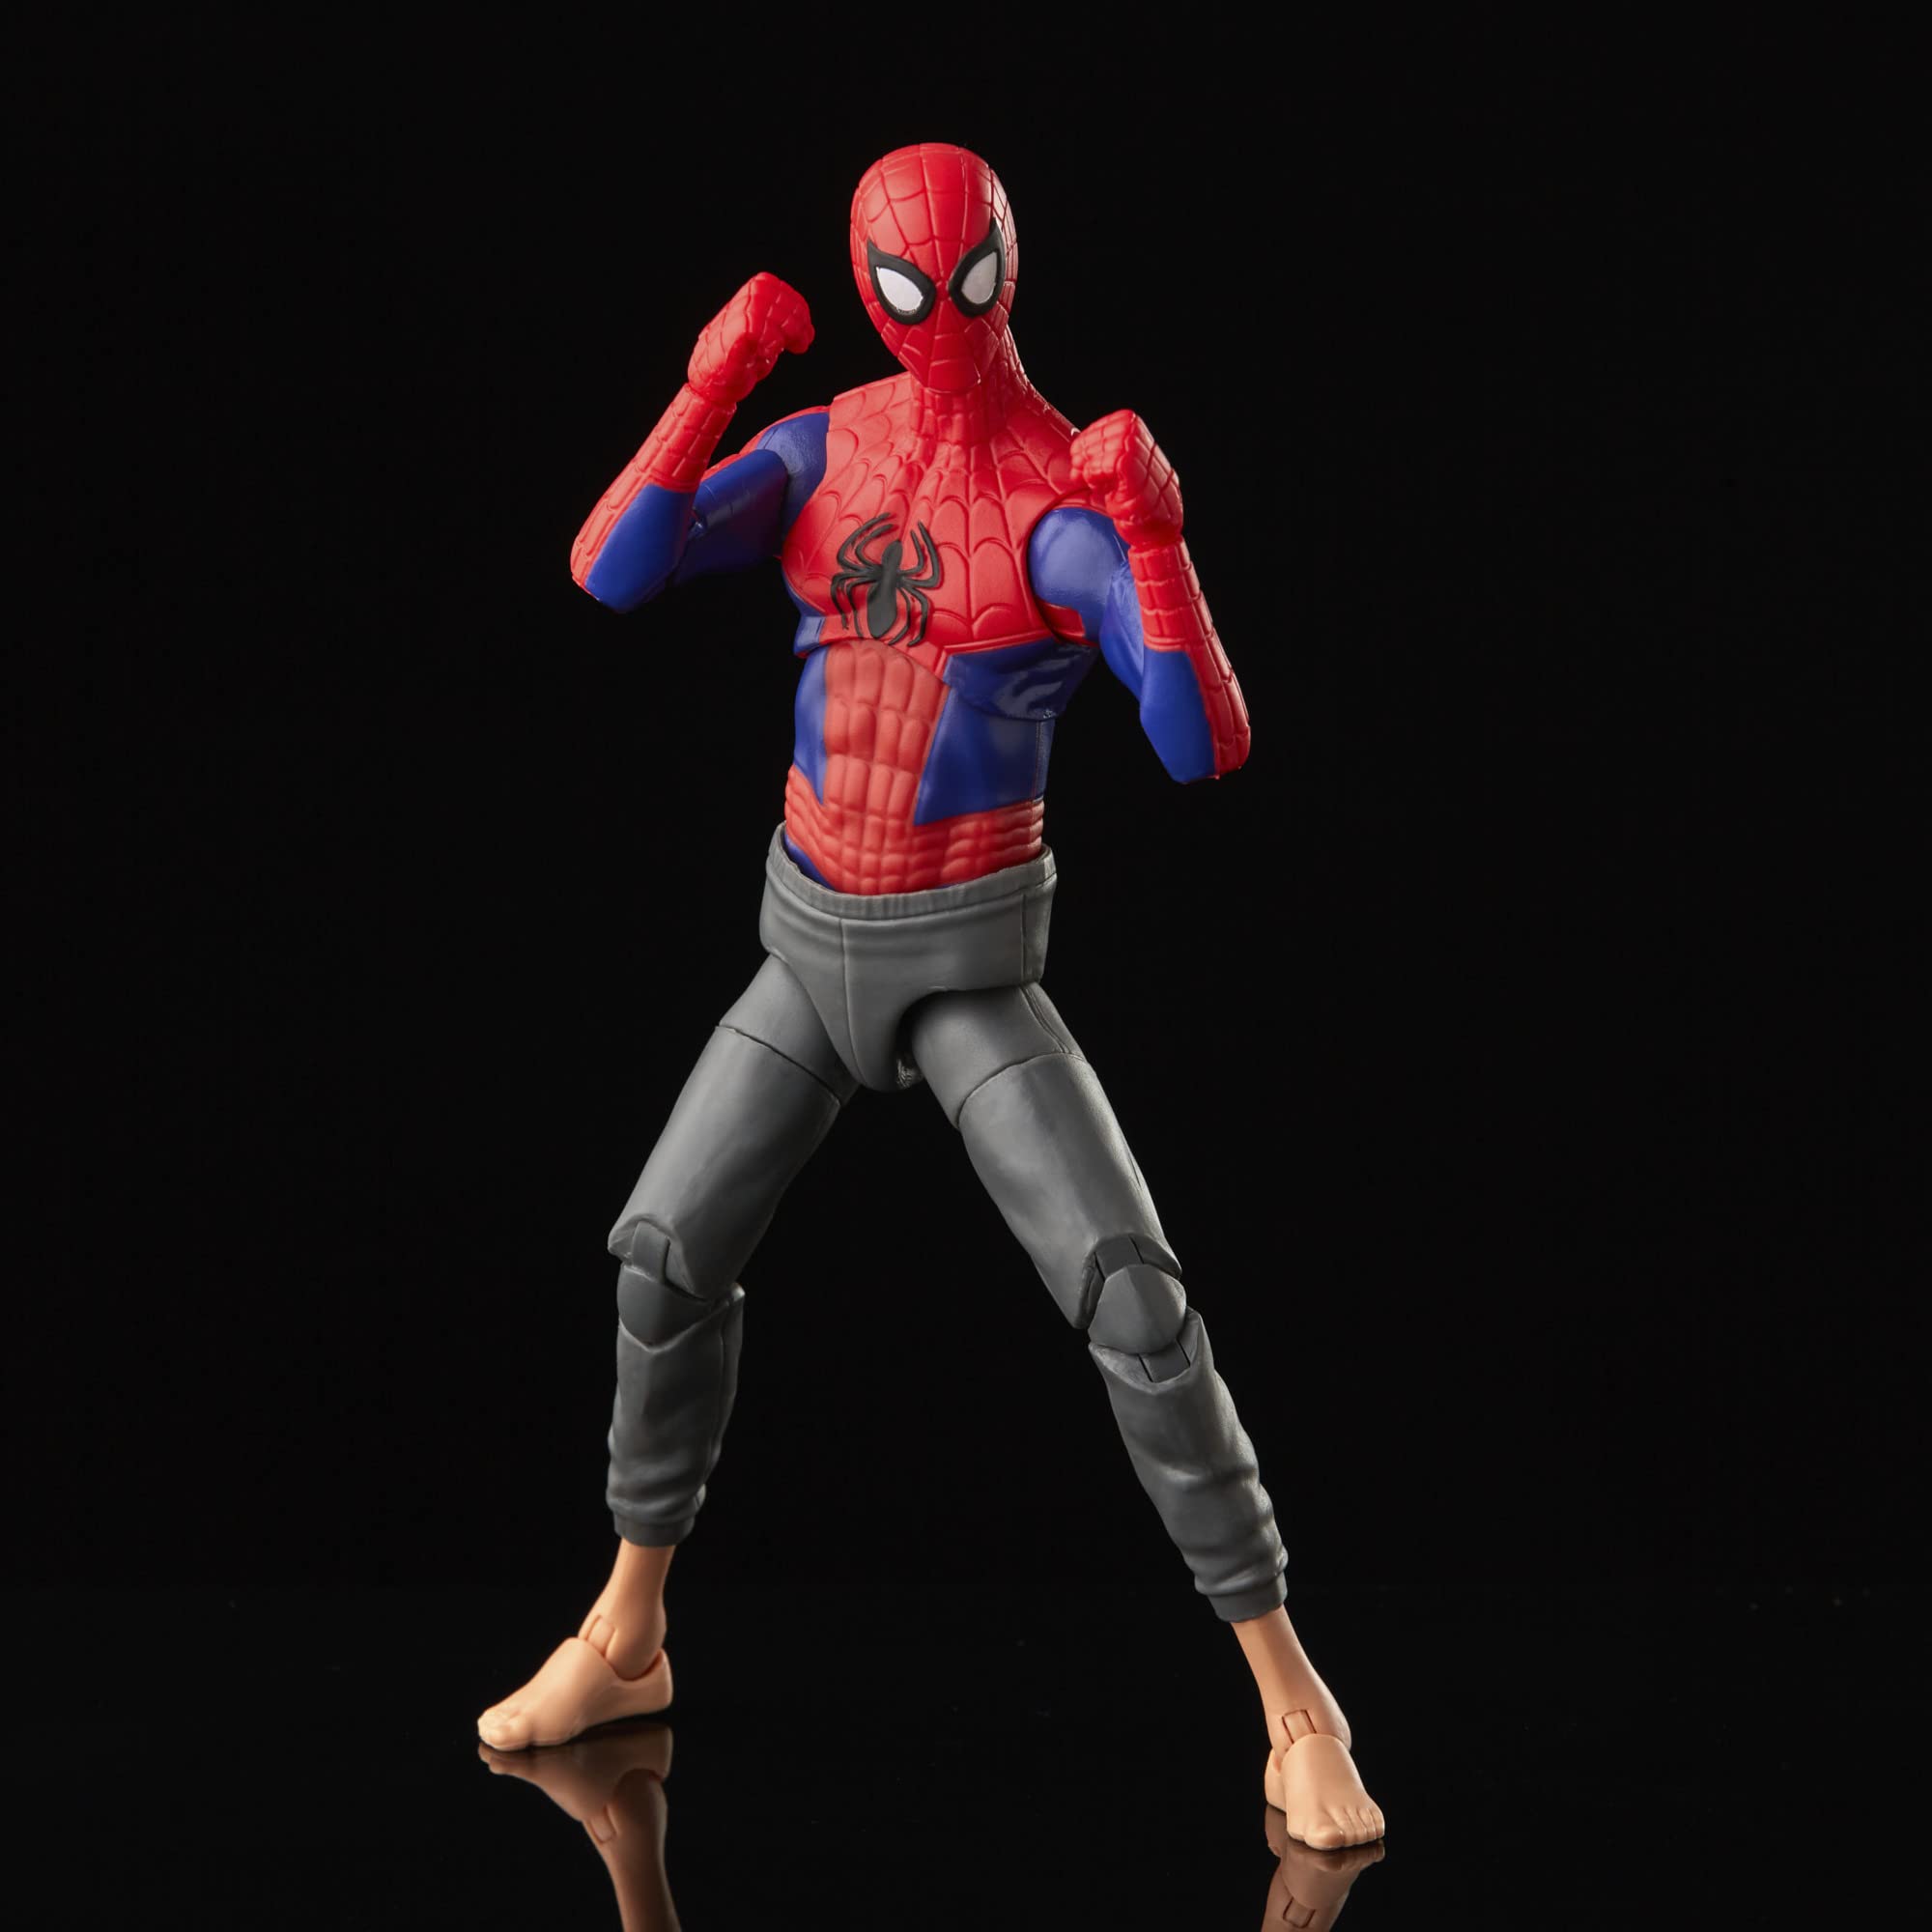 Marvel Hasbro Spider-Man Legends Series Across The Spider-Verse Peter B Parker 6-inch Action Figure Toy,2 Accessories